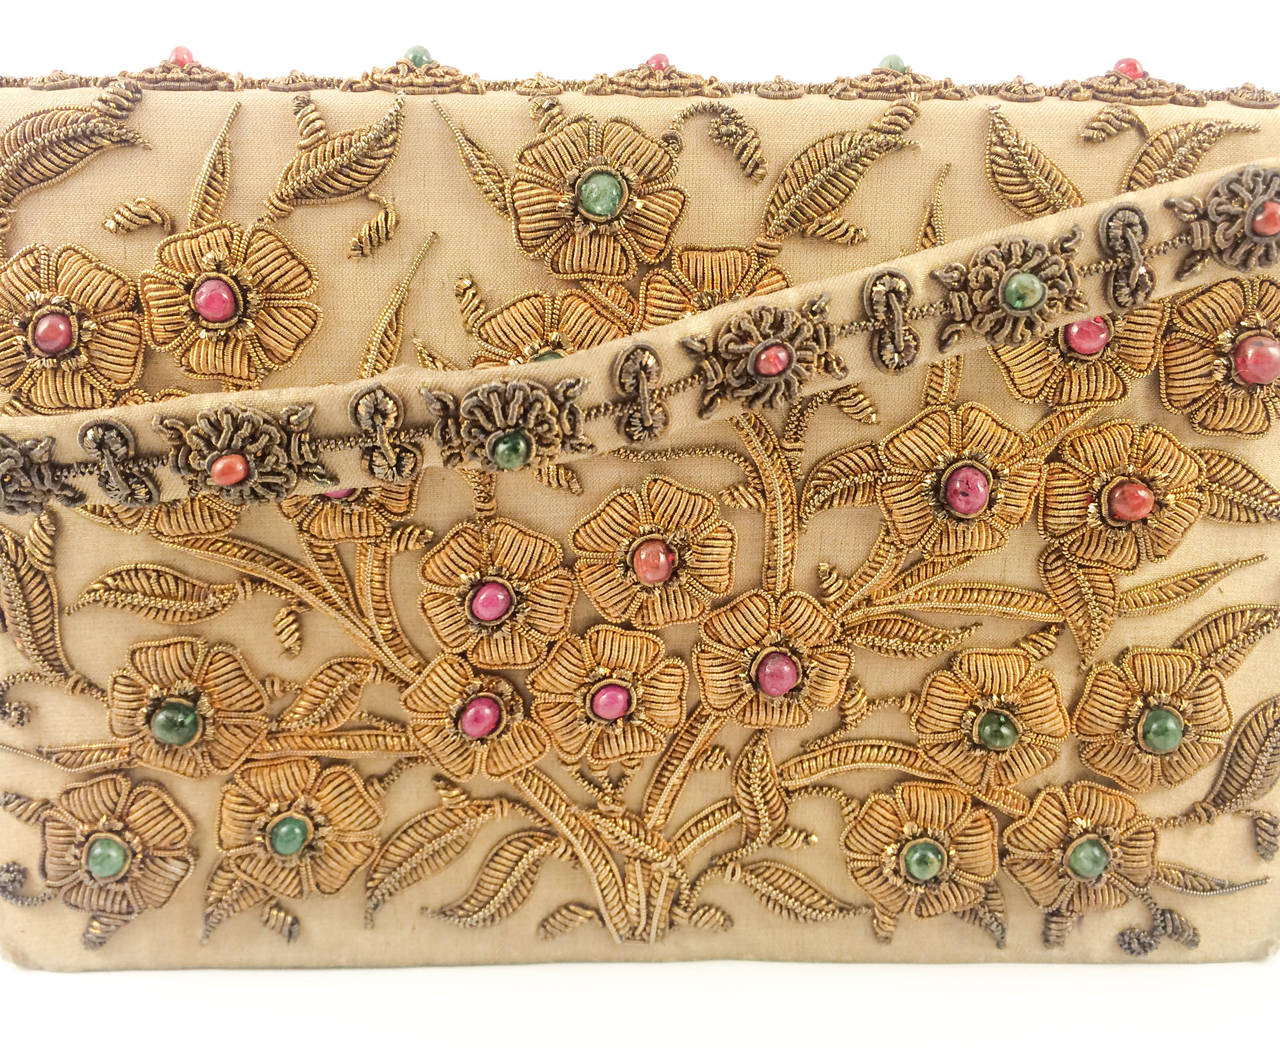 Absolutely stunning Vintage Jewelled Handbag. This clutch is decorated with gild silver, emeralds and rubies.  The flowers and leaves are crafted using the gild silver wires, and the emeralds and rubies are placed in the middle of the flowers. The